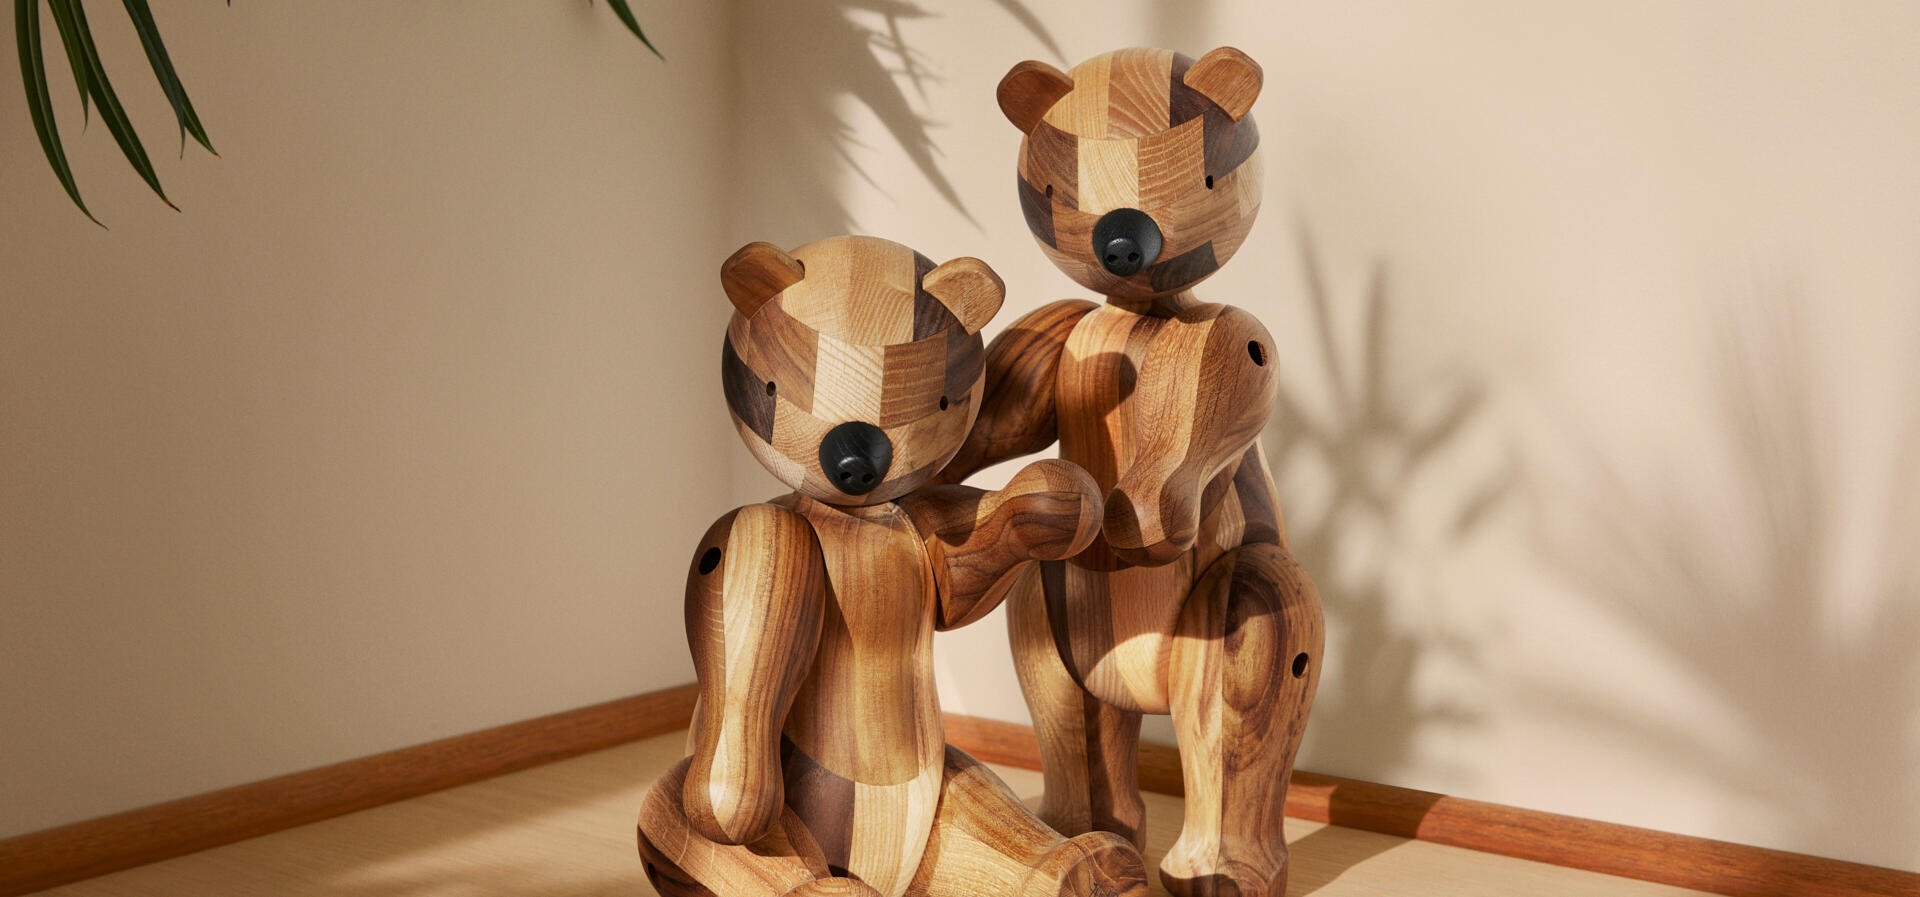 The perfect wedding gift. Reworked Bear from Kay Bojesen